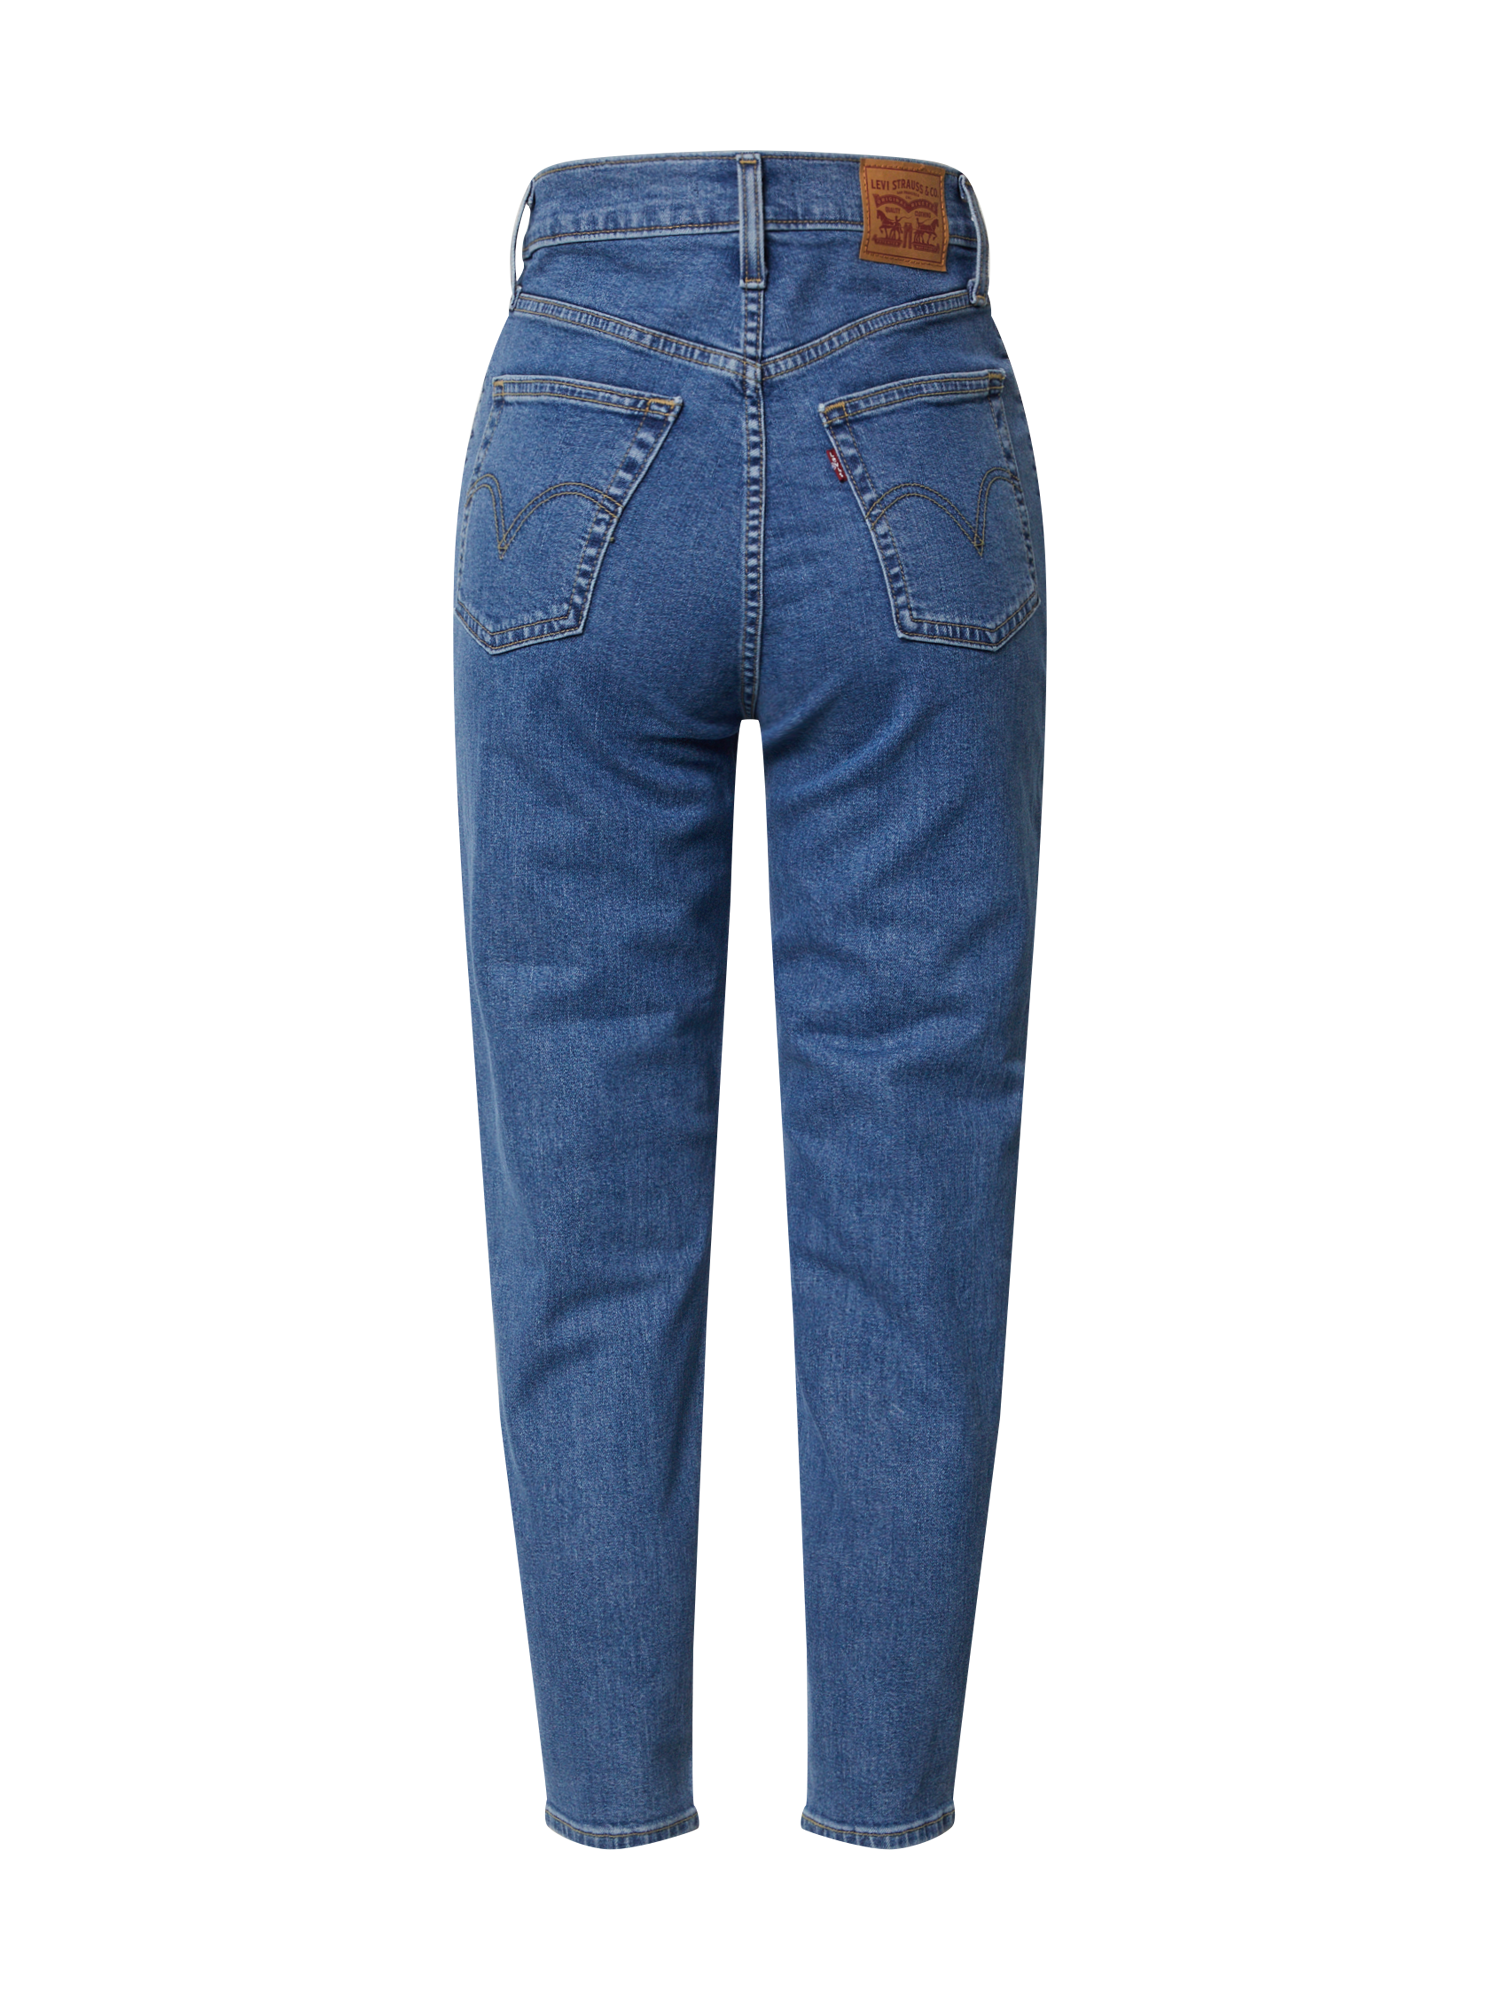 LEVIS Jeans MOM JEANS in Blau 